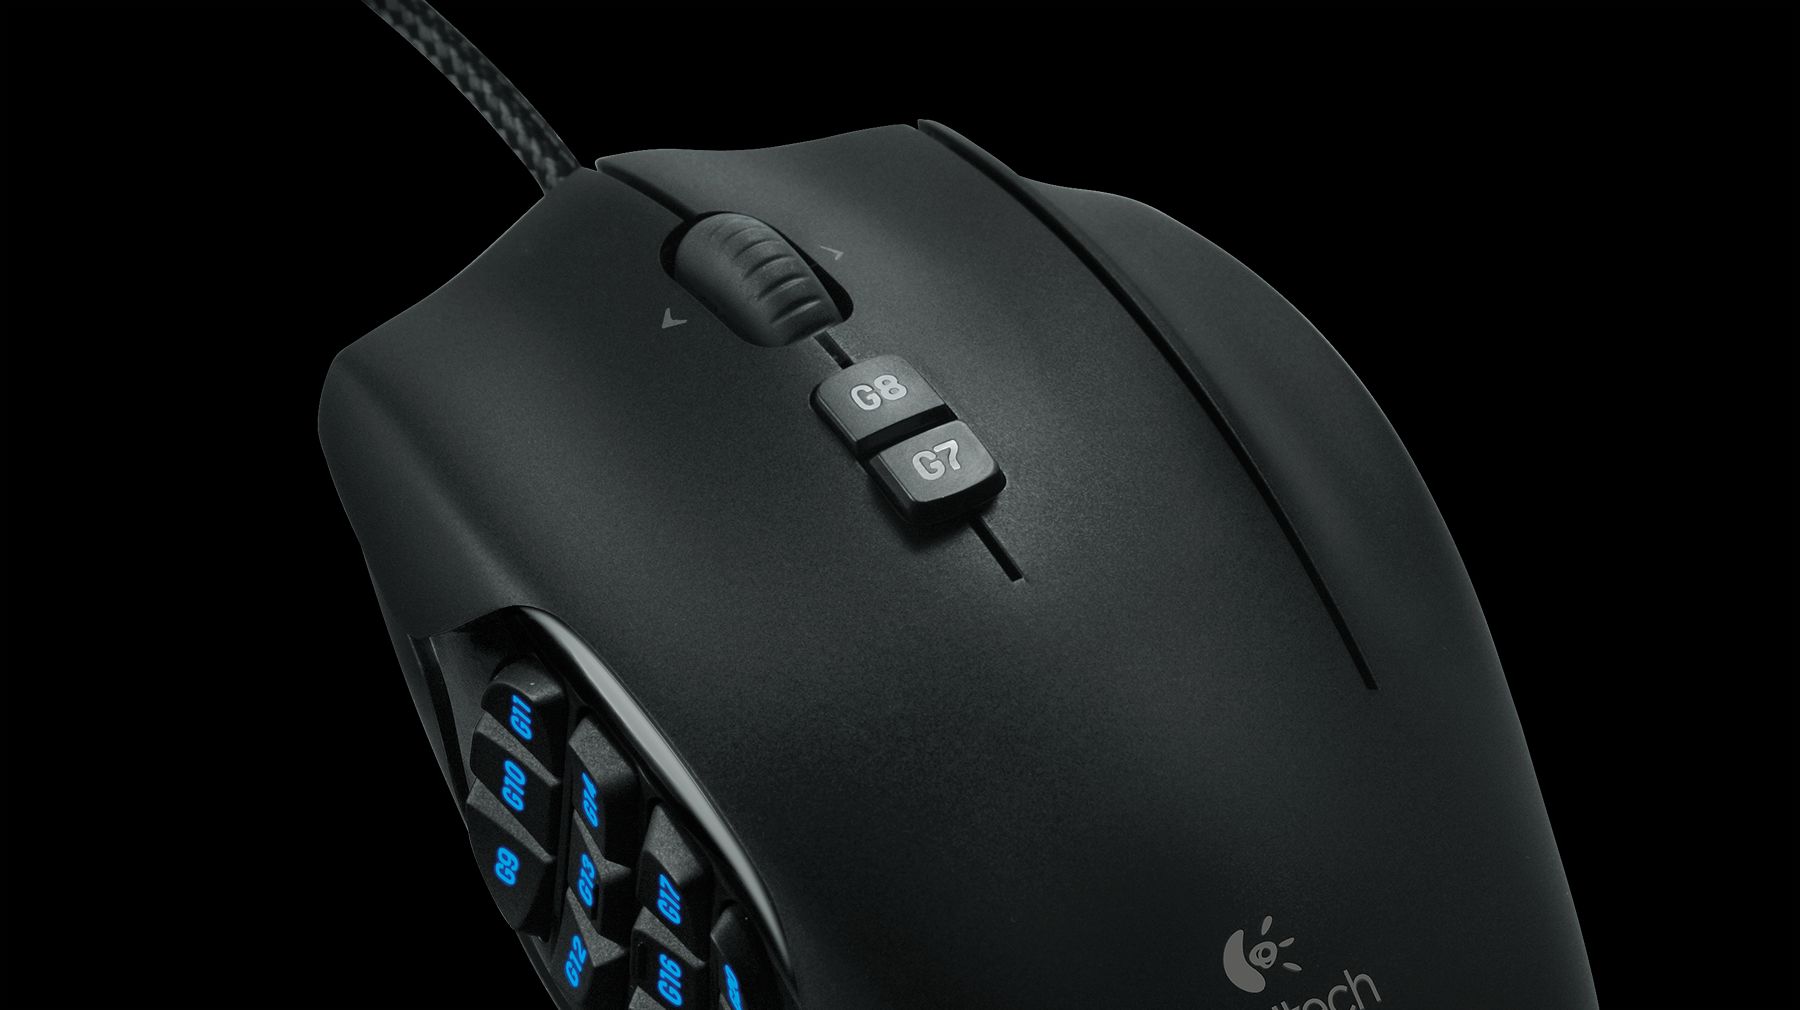 logitech g600 gaming mouse